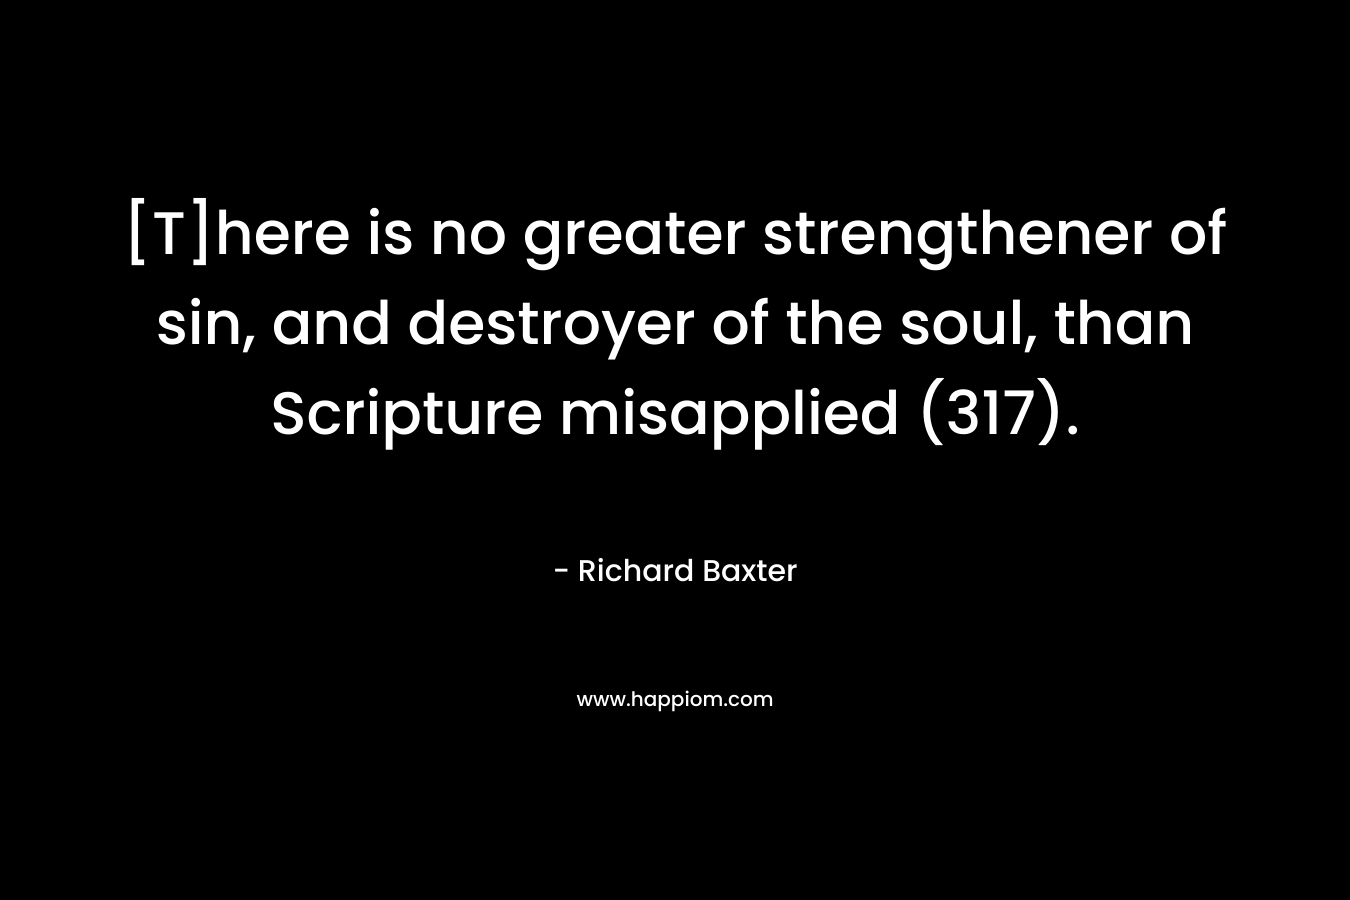 [T]here is no greater strengthener of sin, and destroyer of the soul, than Scripture misapplied (317). – Richard Baxter